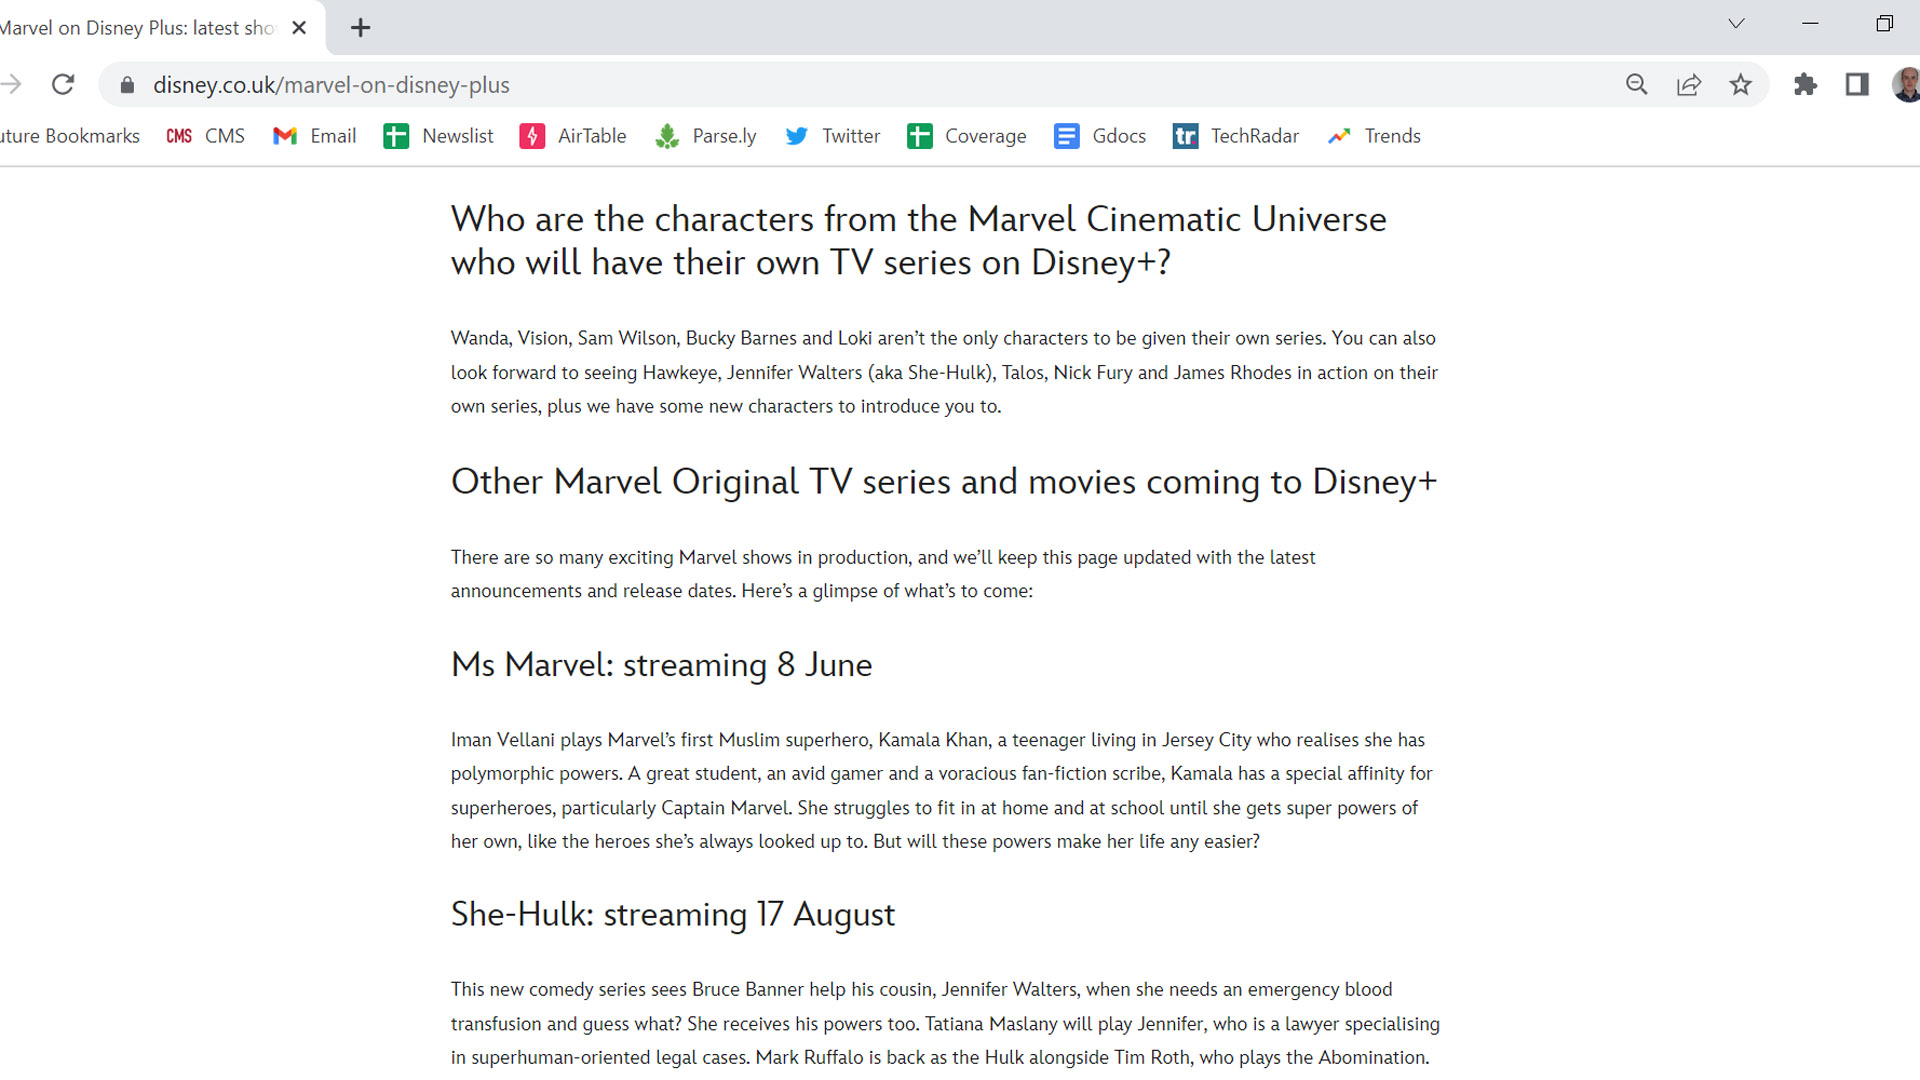 A screenshot showing the leaked release date for Marvel Studios' She-Hulk TV show